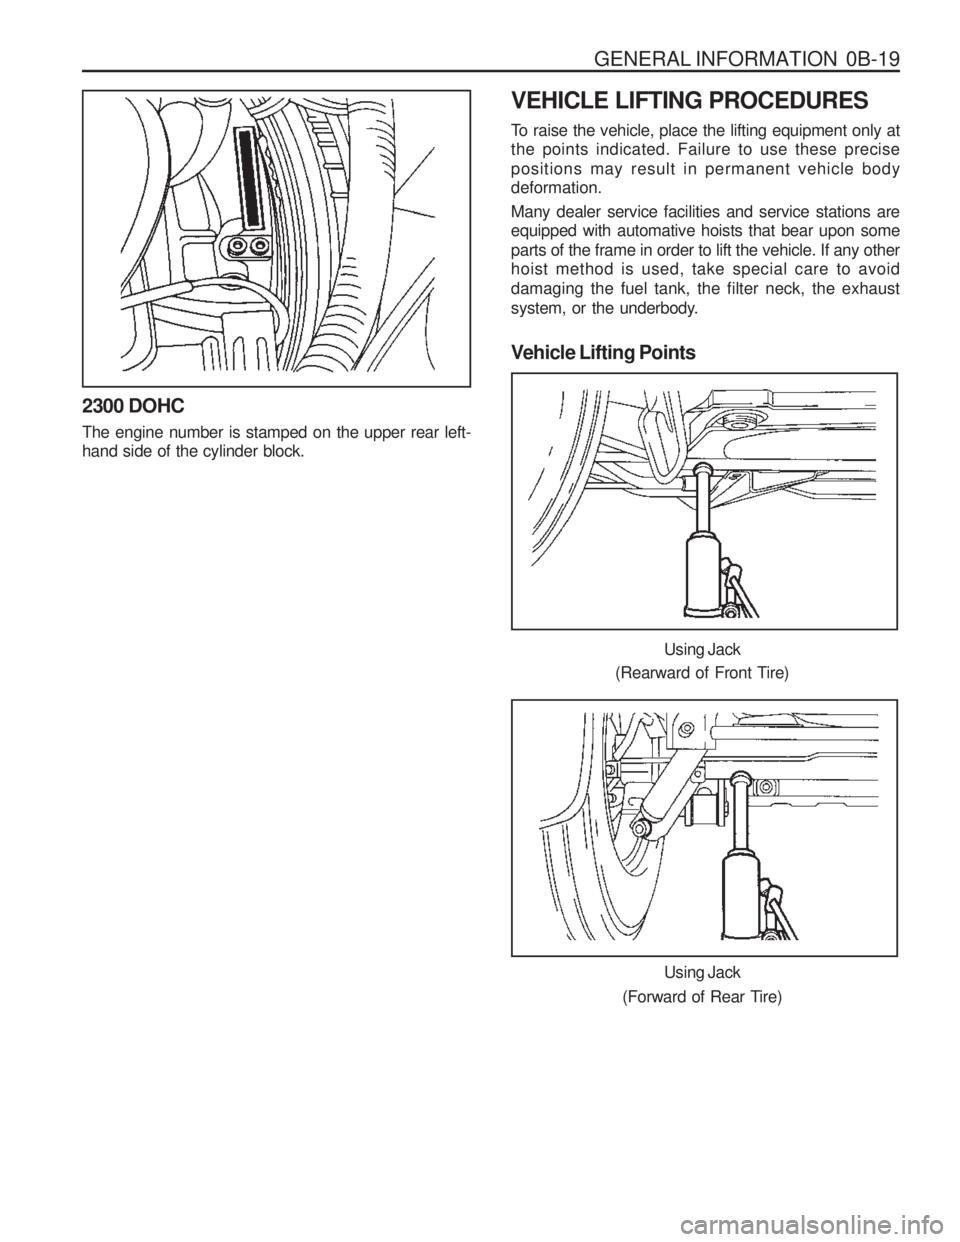 SSANGYONG MUSSO 2003 User Guide GENERAL INFORMATION  0B-19
VEHICLE LIFTING PROCEDURES 
To raise the vehicle, place the lifting equipment only at the points indicated. Failure to use these precise positions may result in permanent ve